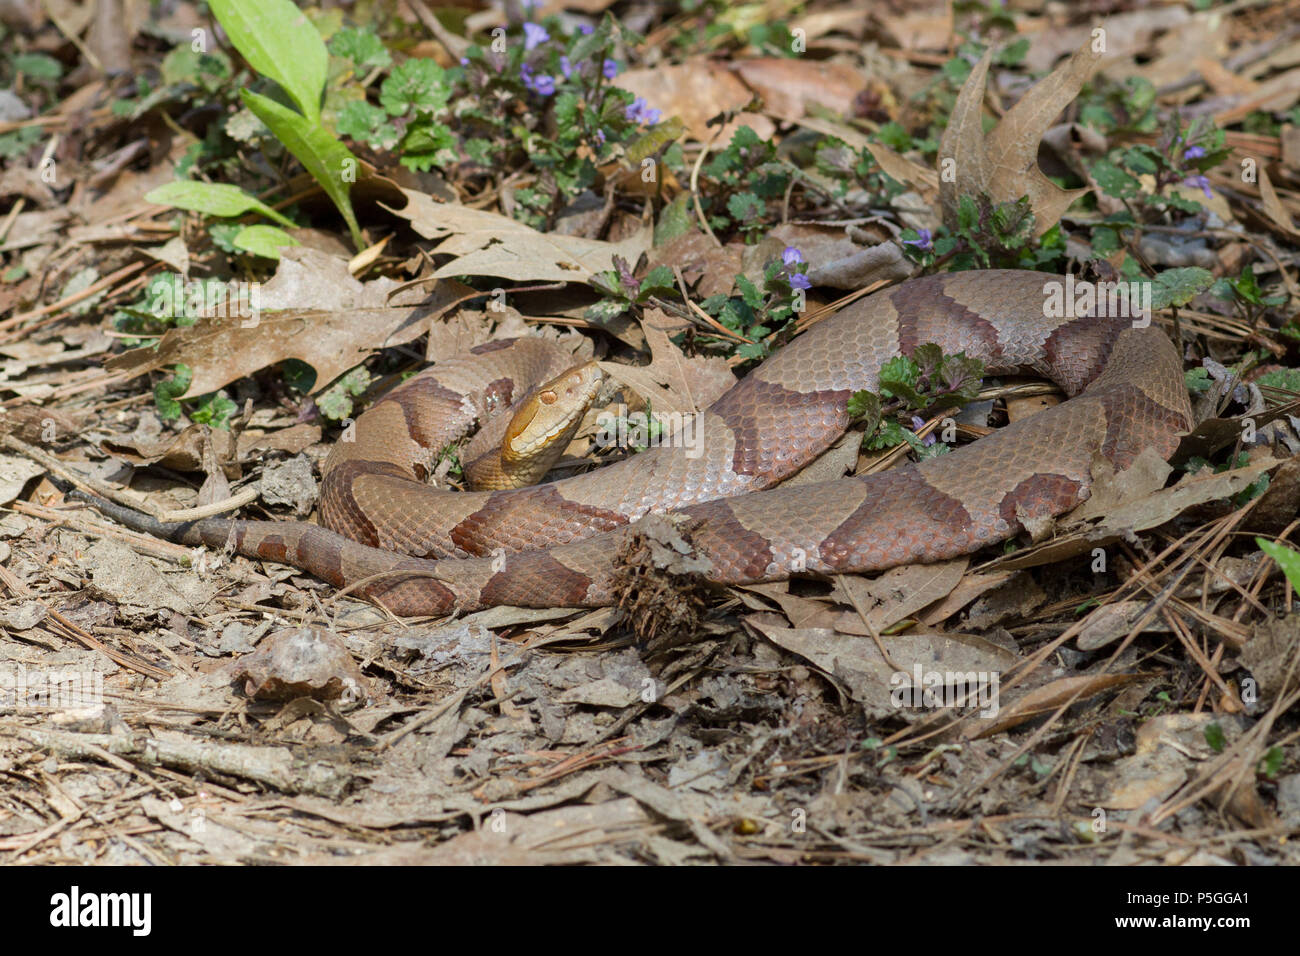 A northern copperhead. Stock Photo